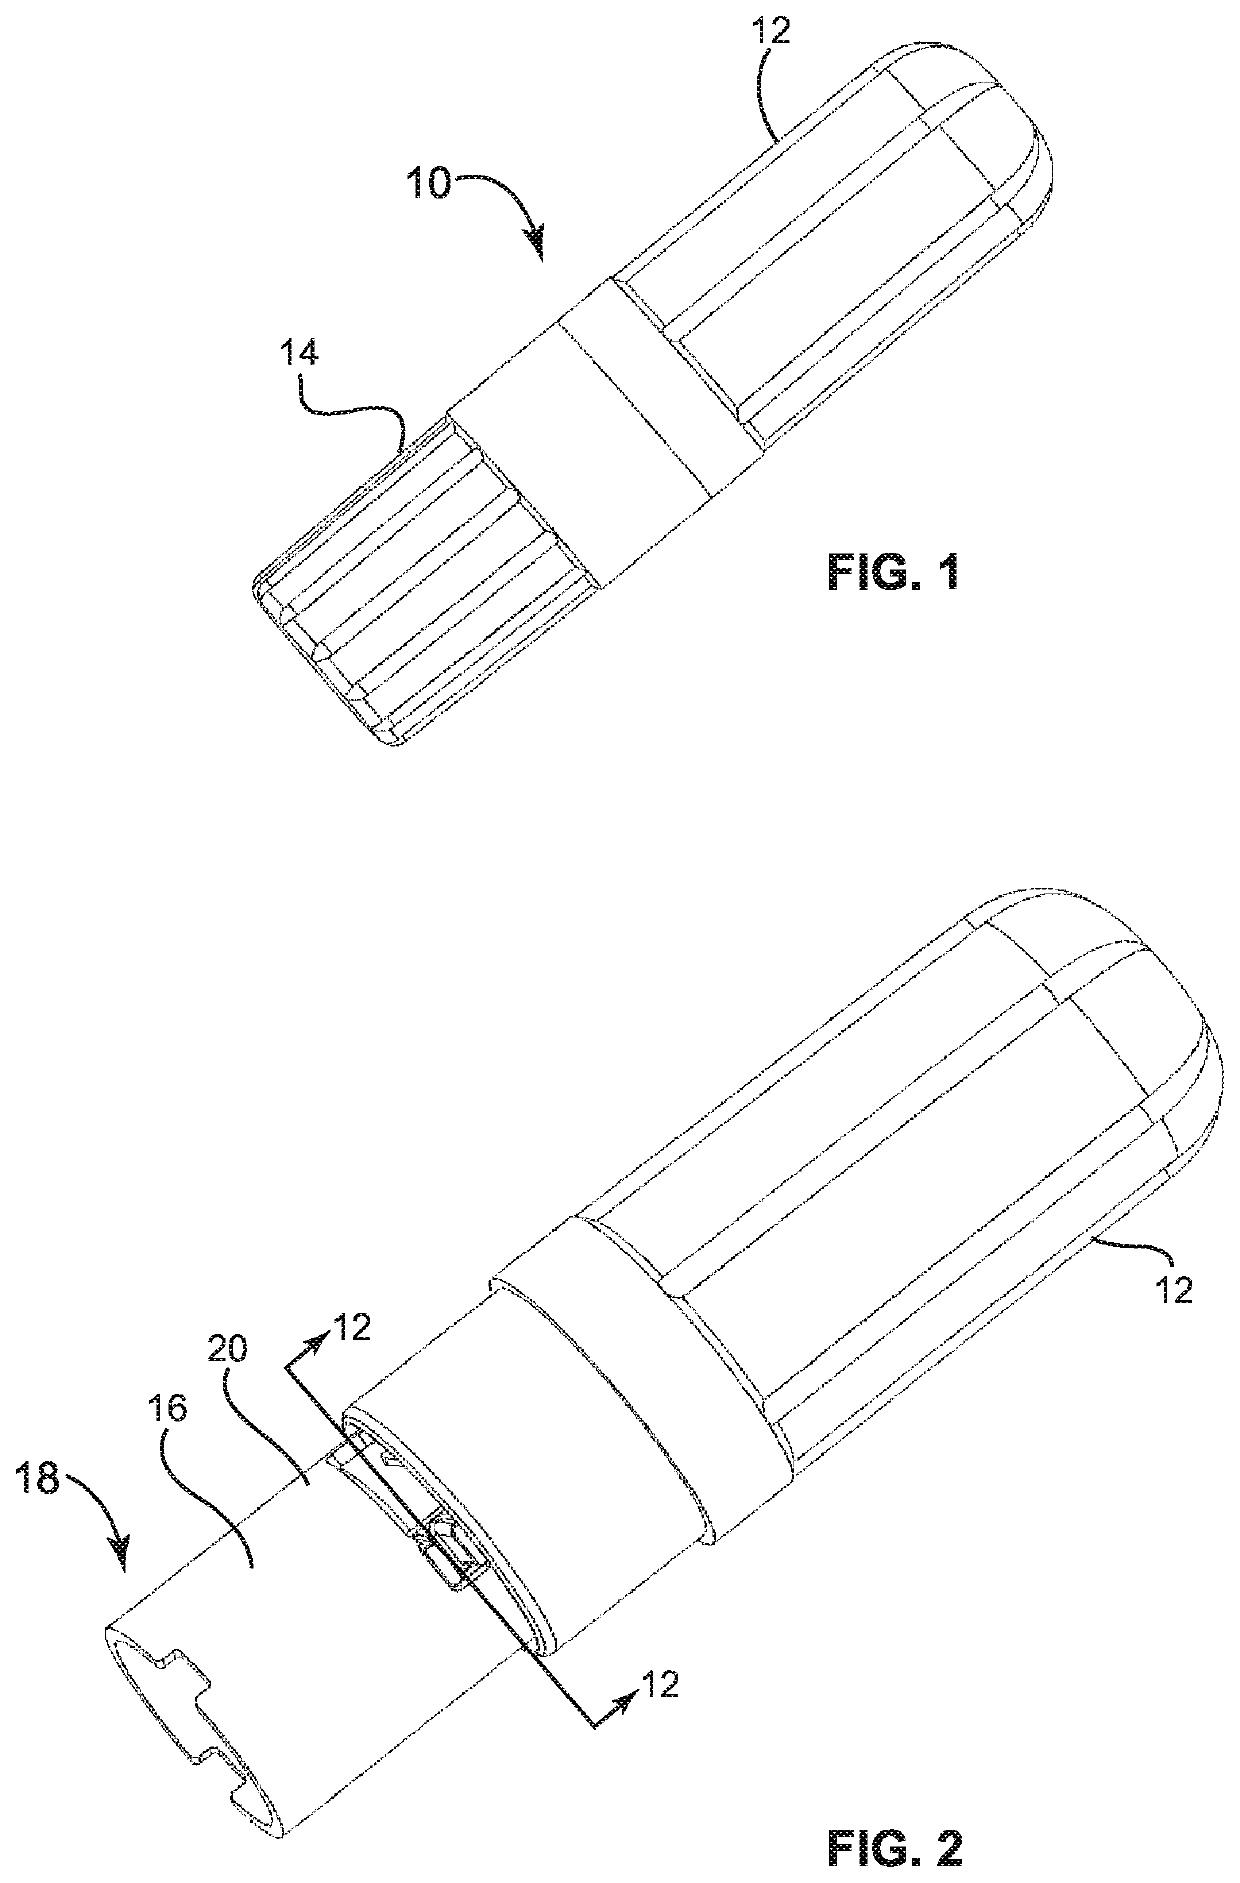 Protective cover for a dental syringe needle